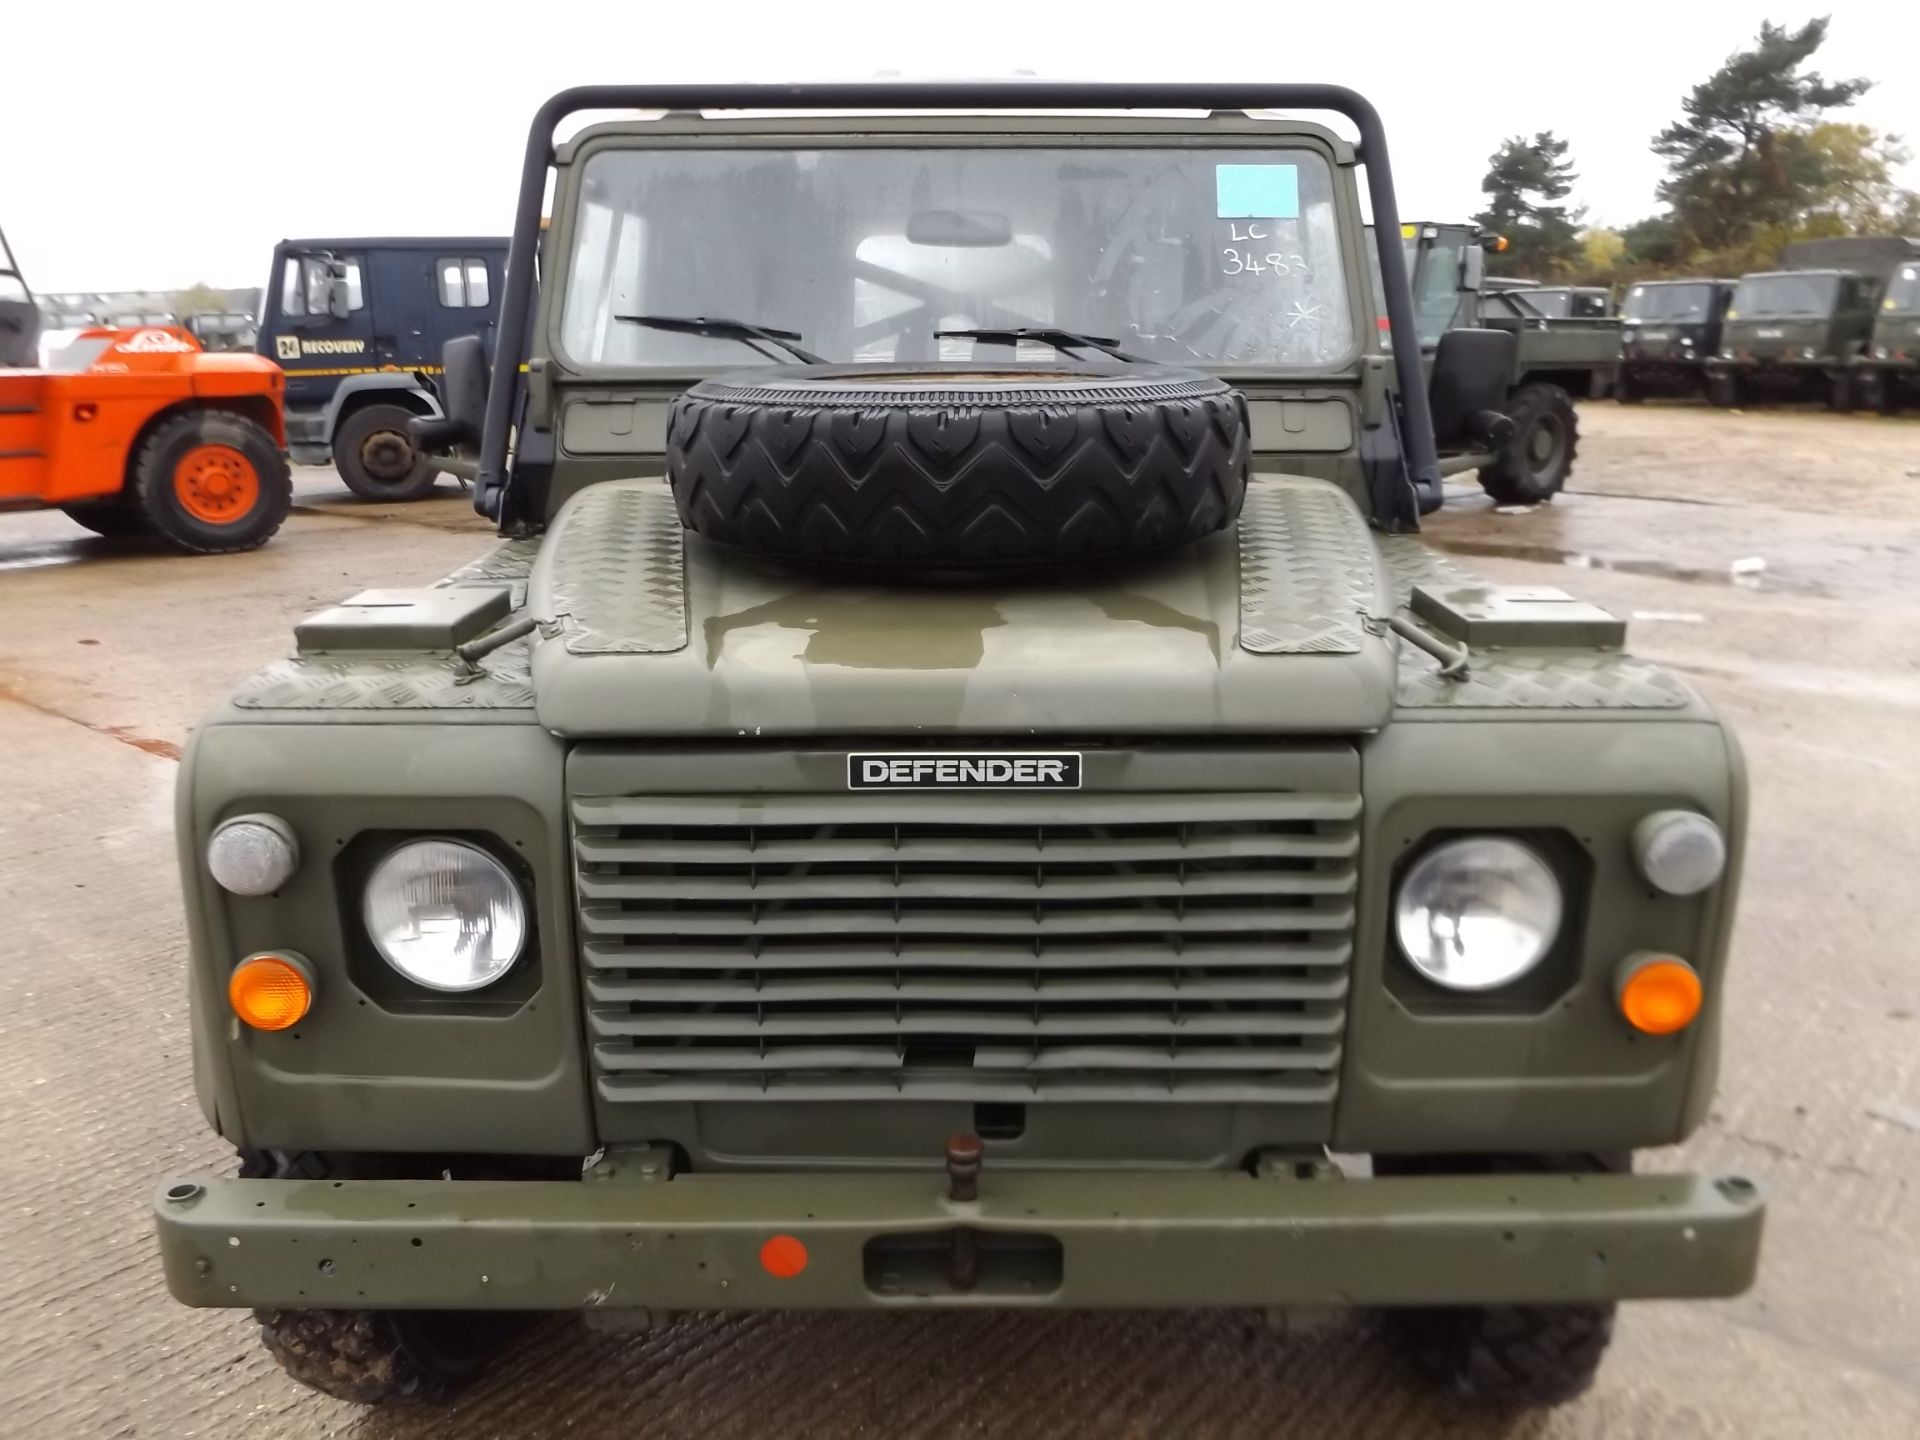 LHD Land Rover TITHONUS 110 Hard Top - Image 2 of 16